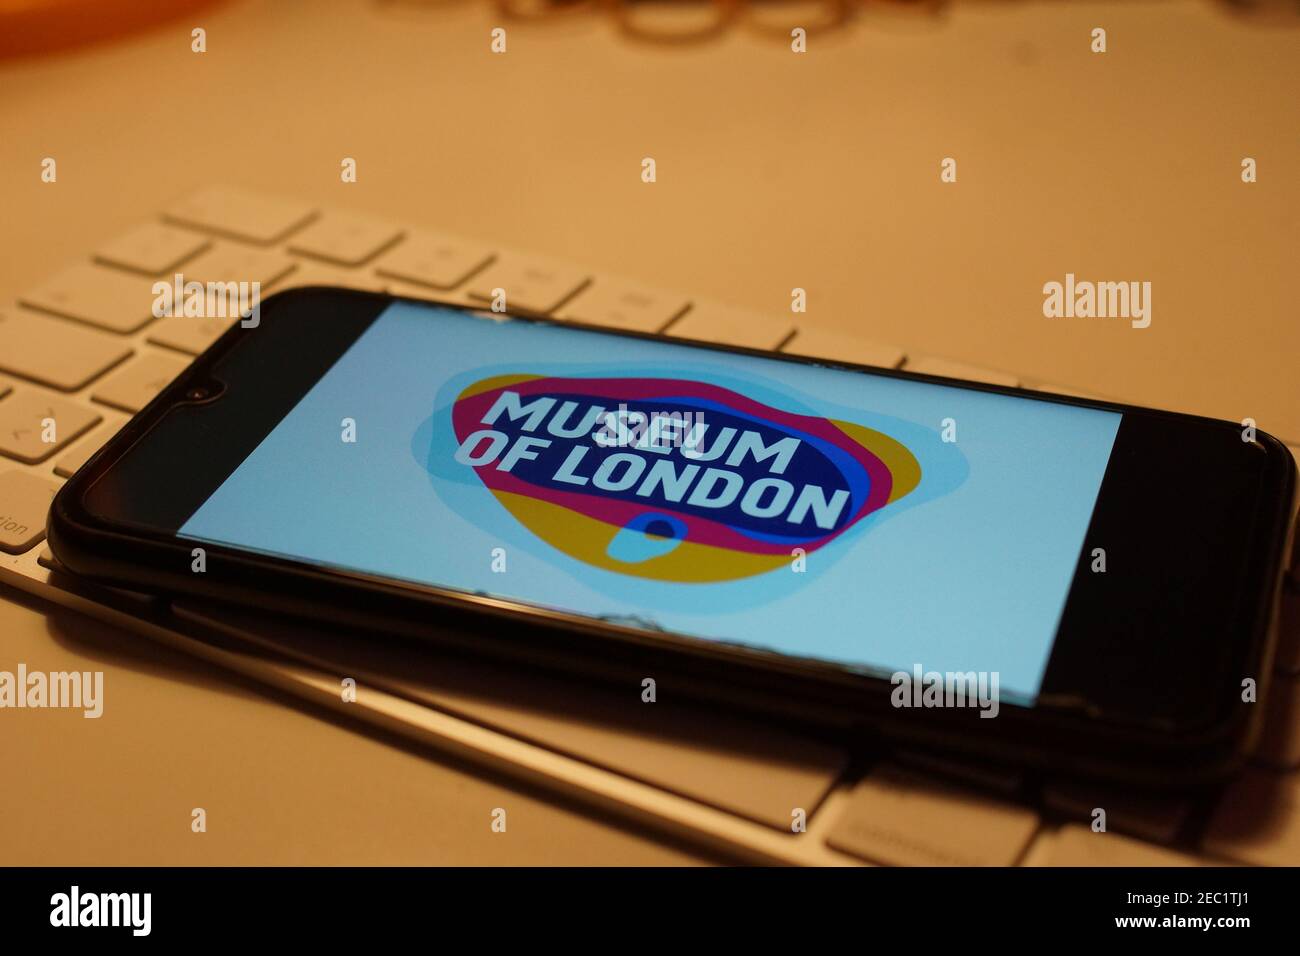 Smartphone with Museum of london logo on computer keyboard Stock Photo